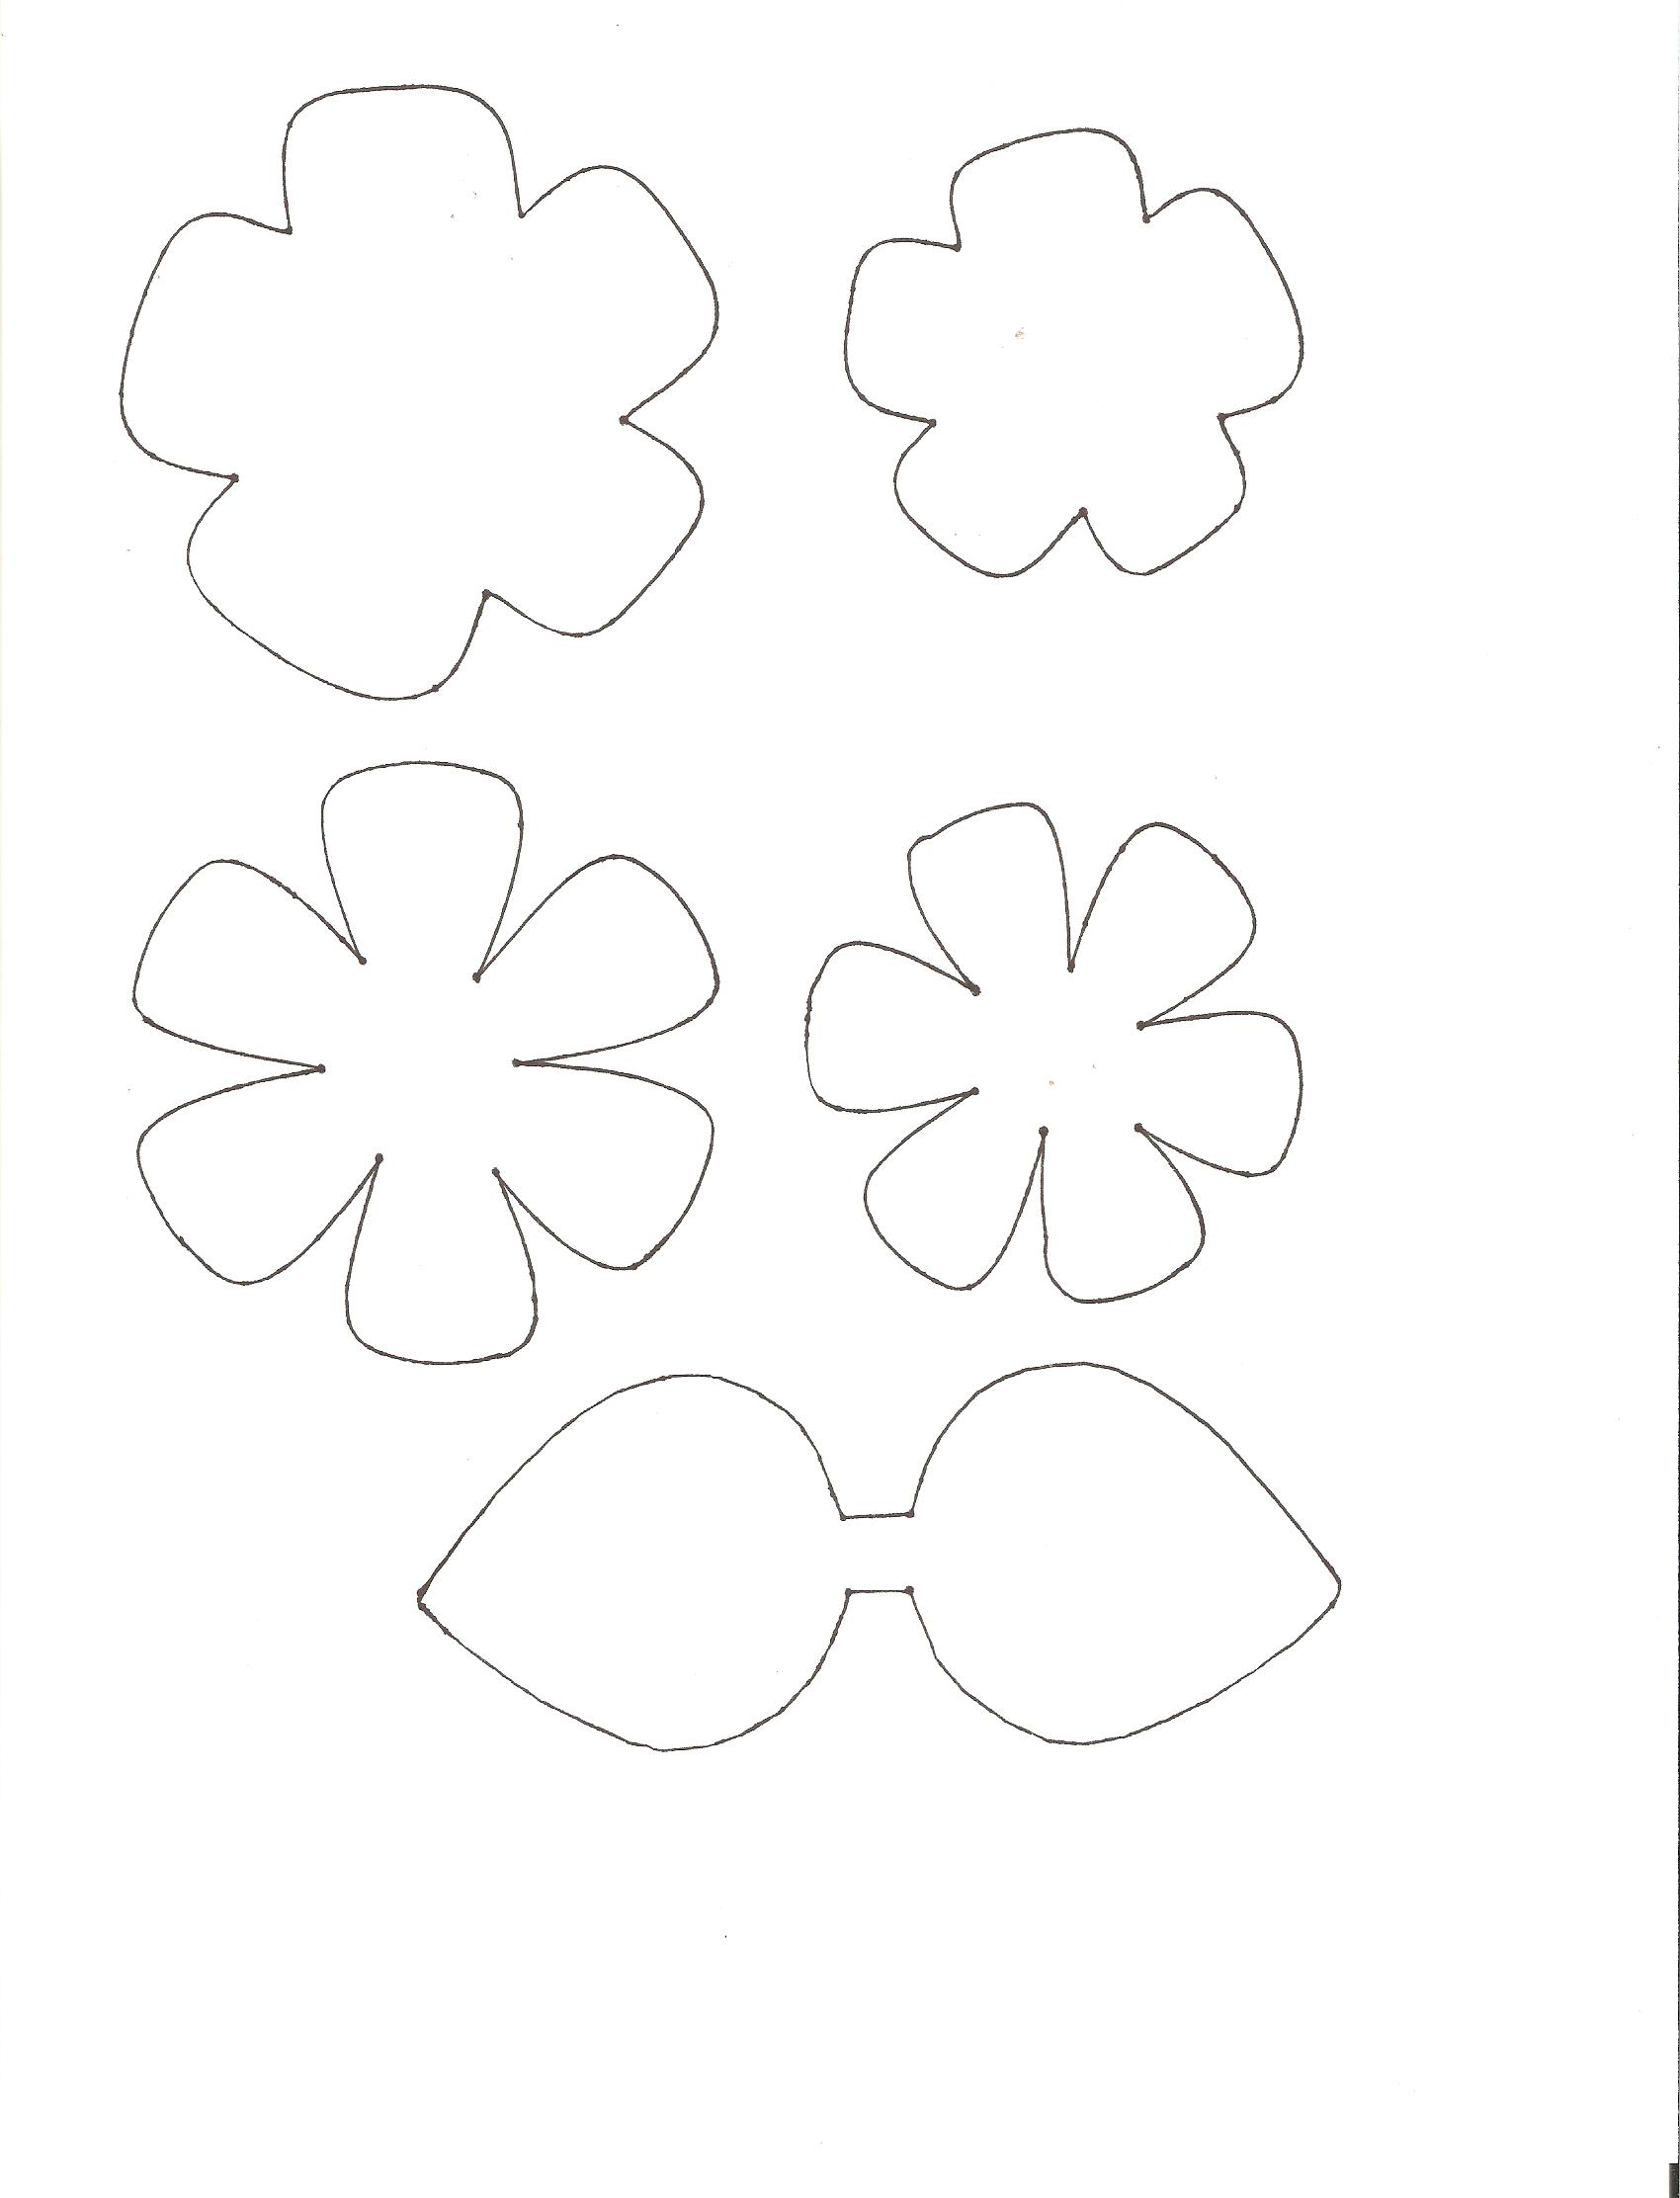 Paper Flower Cut Out Template from clipart-library.com